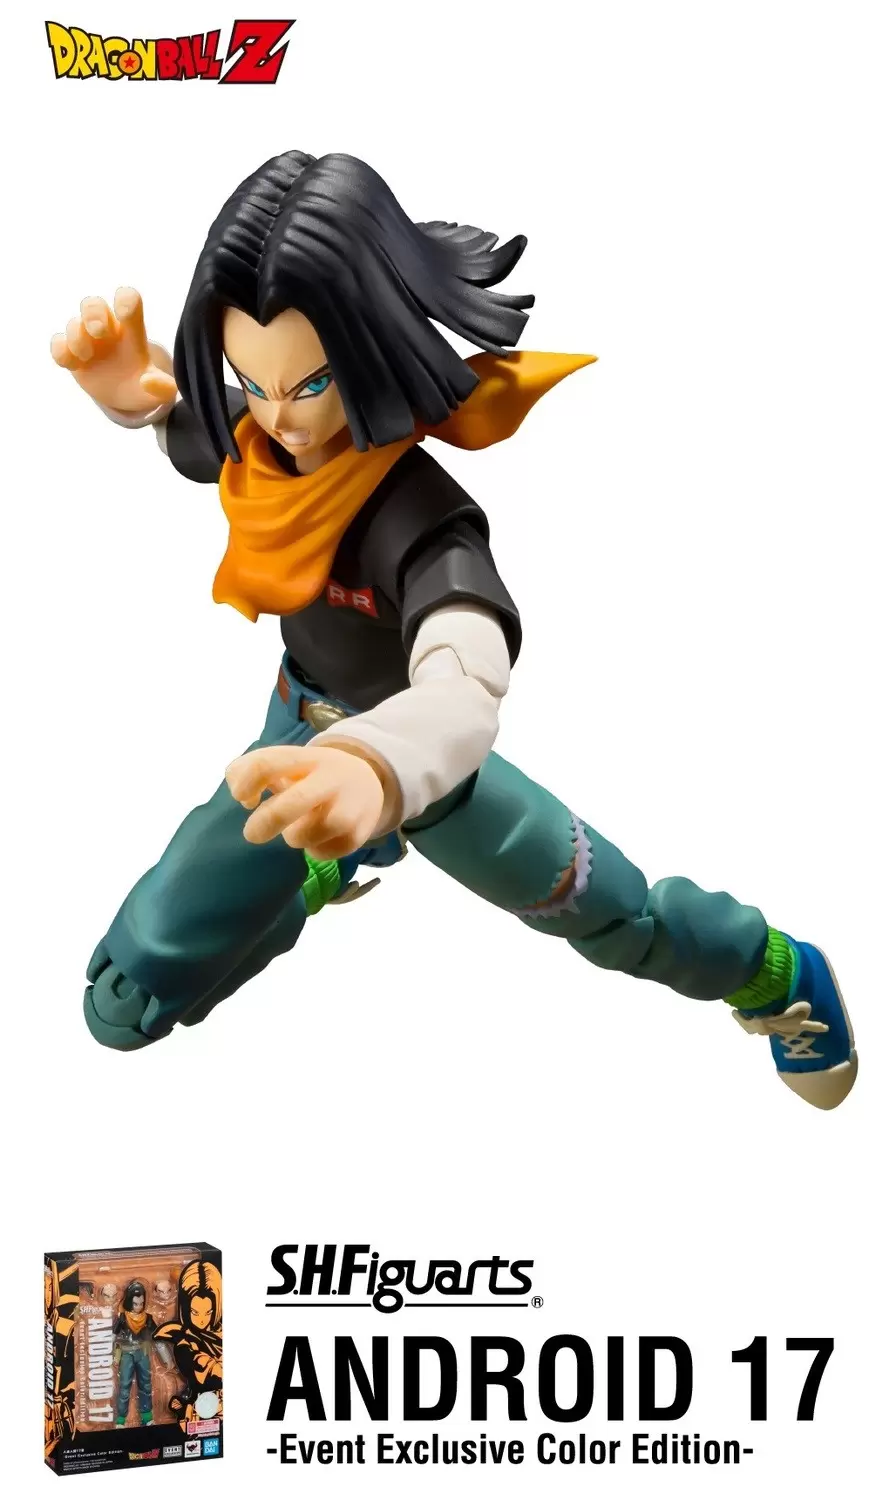 S.H. Figuarts Dragonball - C17 / Android 17 SDCC 2020